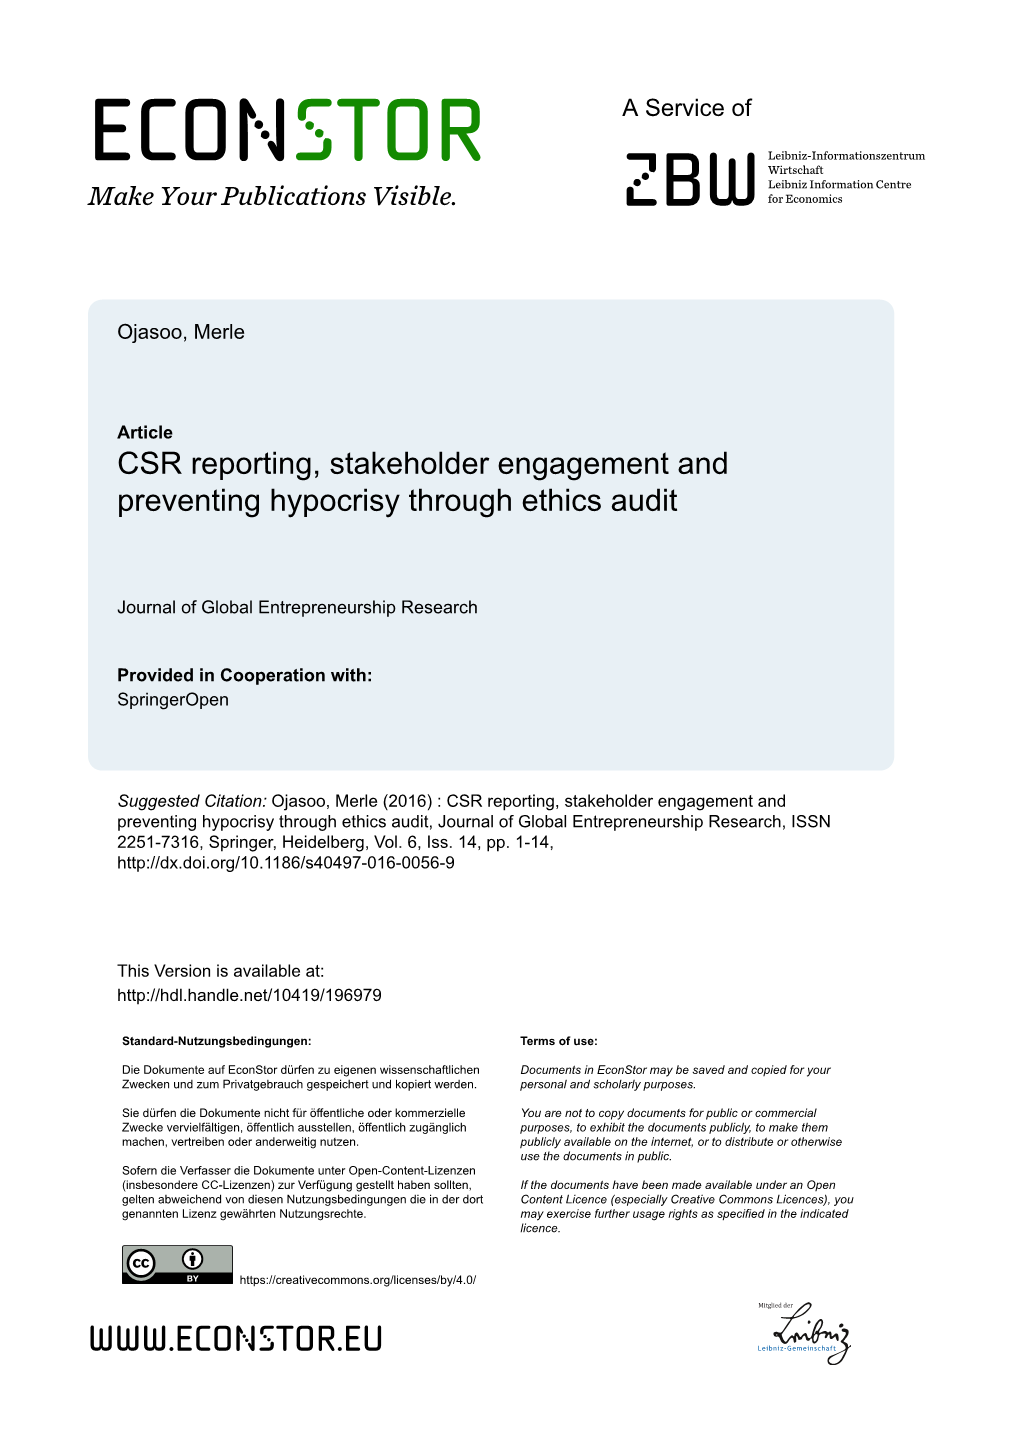 CSR Reporting, Stakeholder Engagement and Preventing Hypocrisy Through Ethics Audit